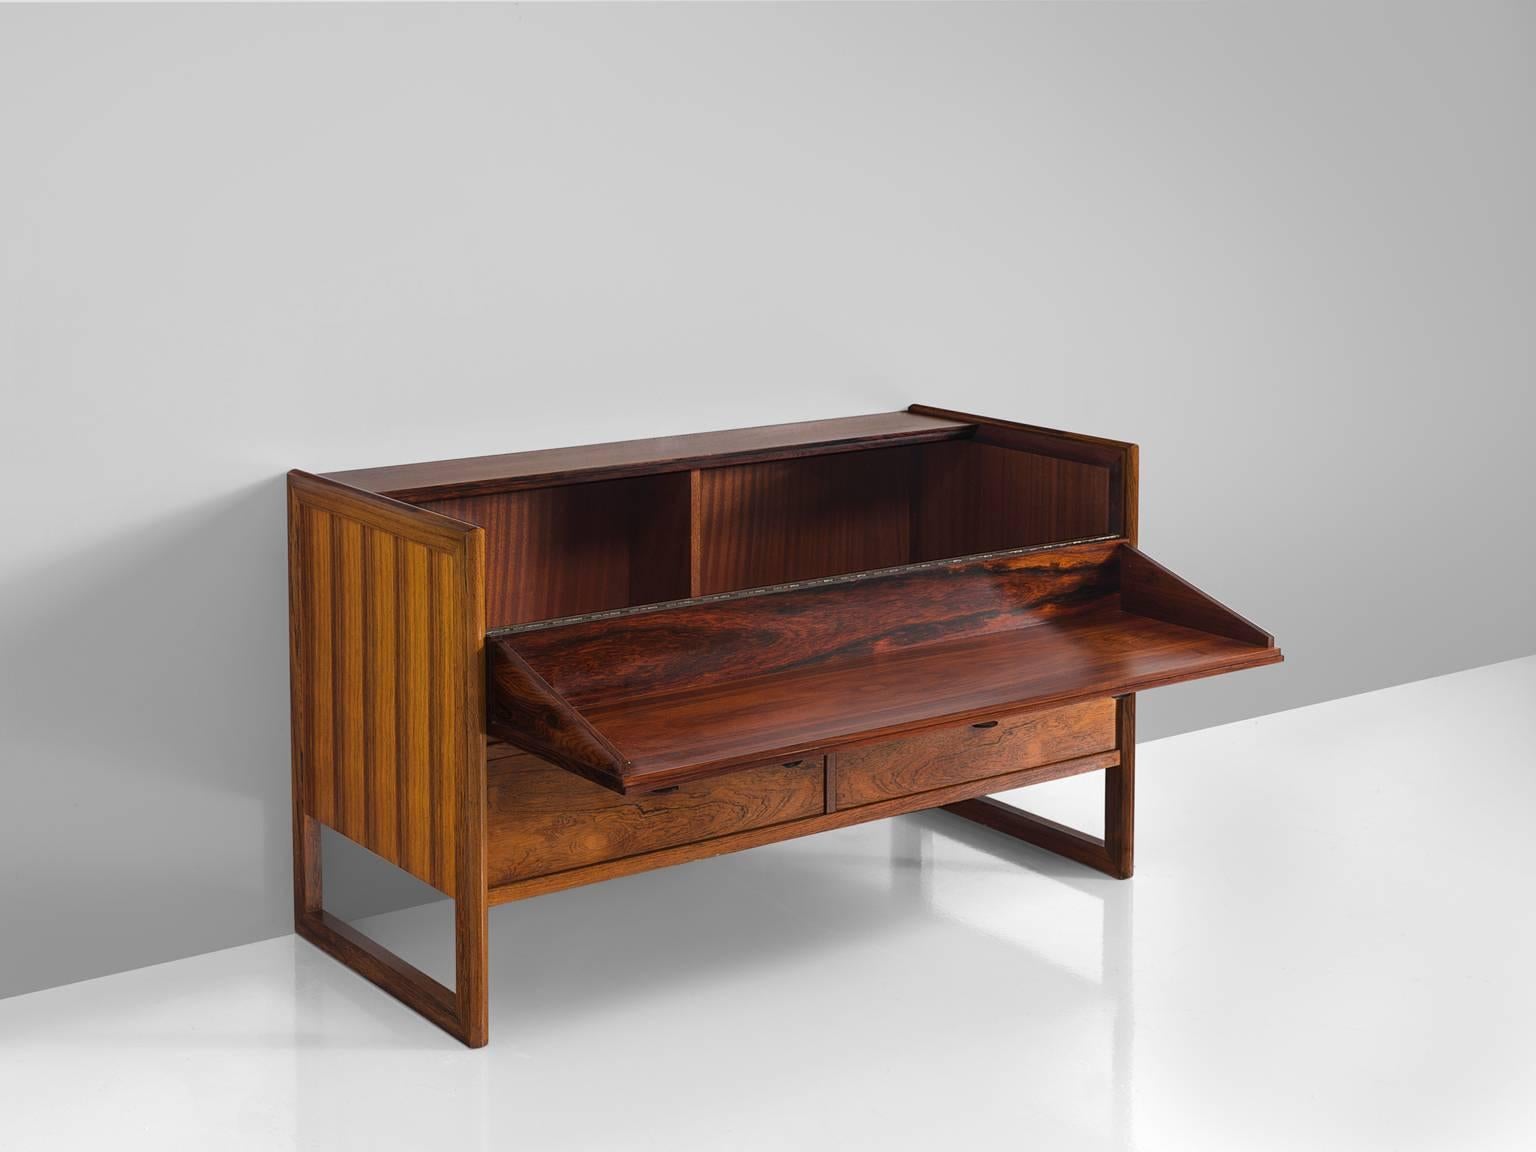 Cabinet, rosewood, leather Denmark, 1950s

This rosewood dry bar features two bottom drawers that rest sledge feet, a flip up door and leather handles. This cabinet is typically Danish in both its use of materials as the modesty in its design.